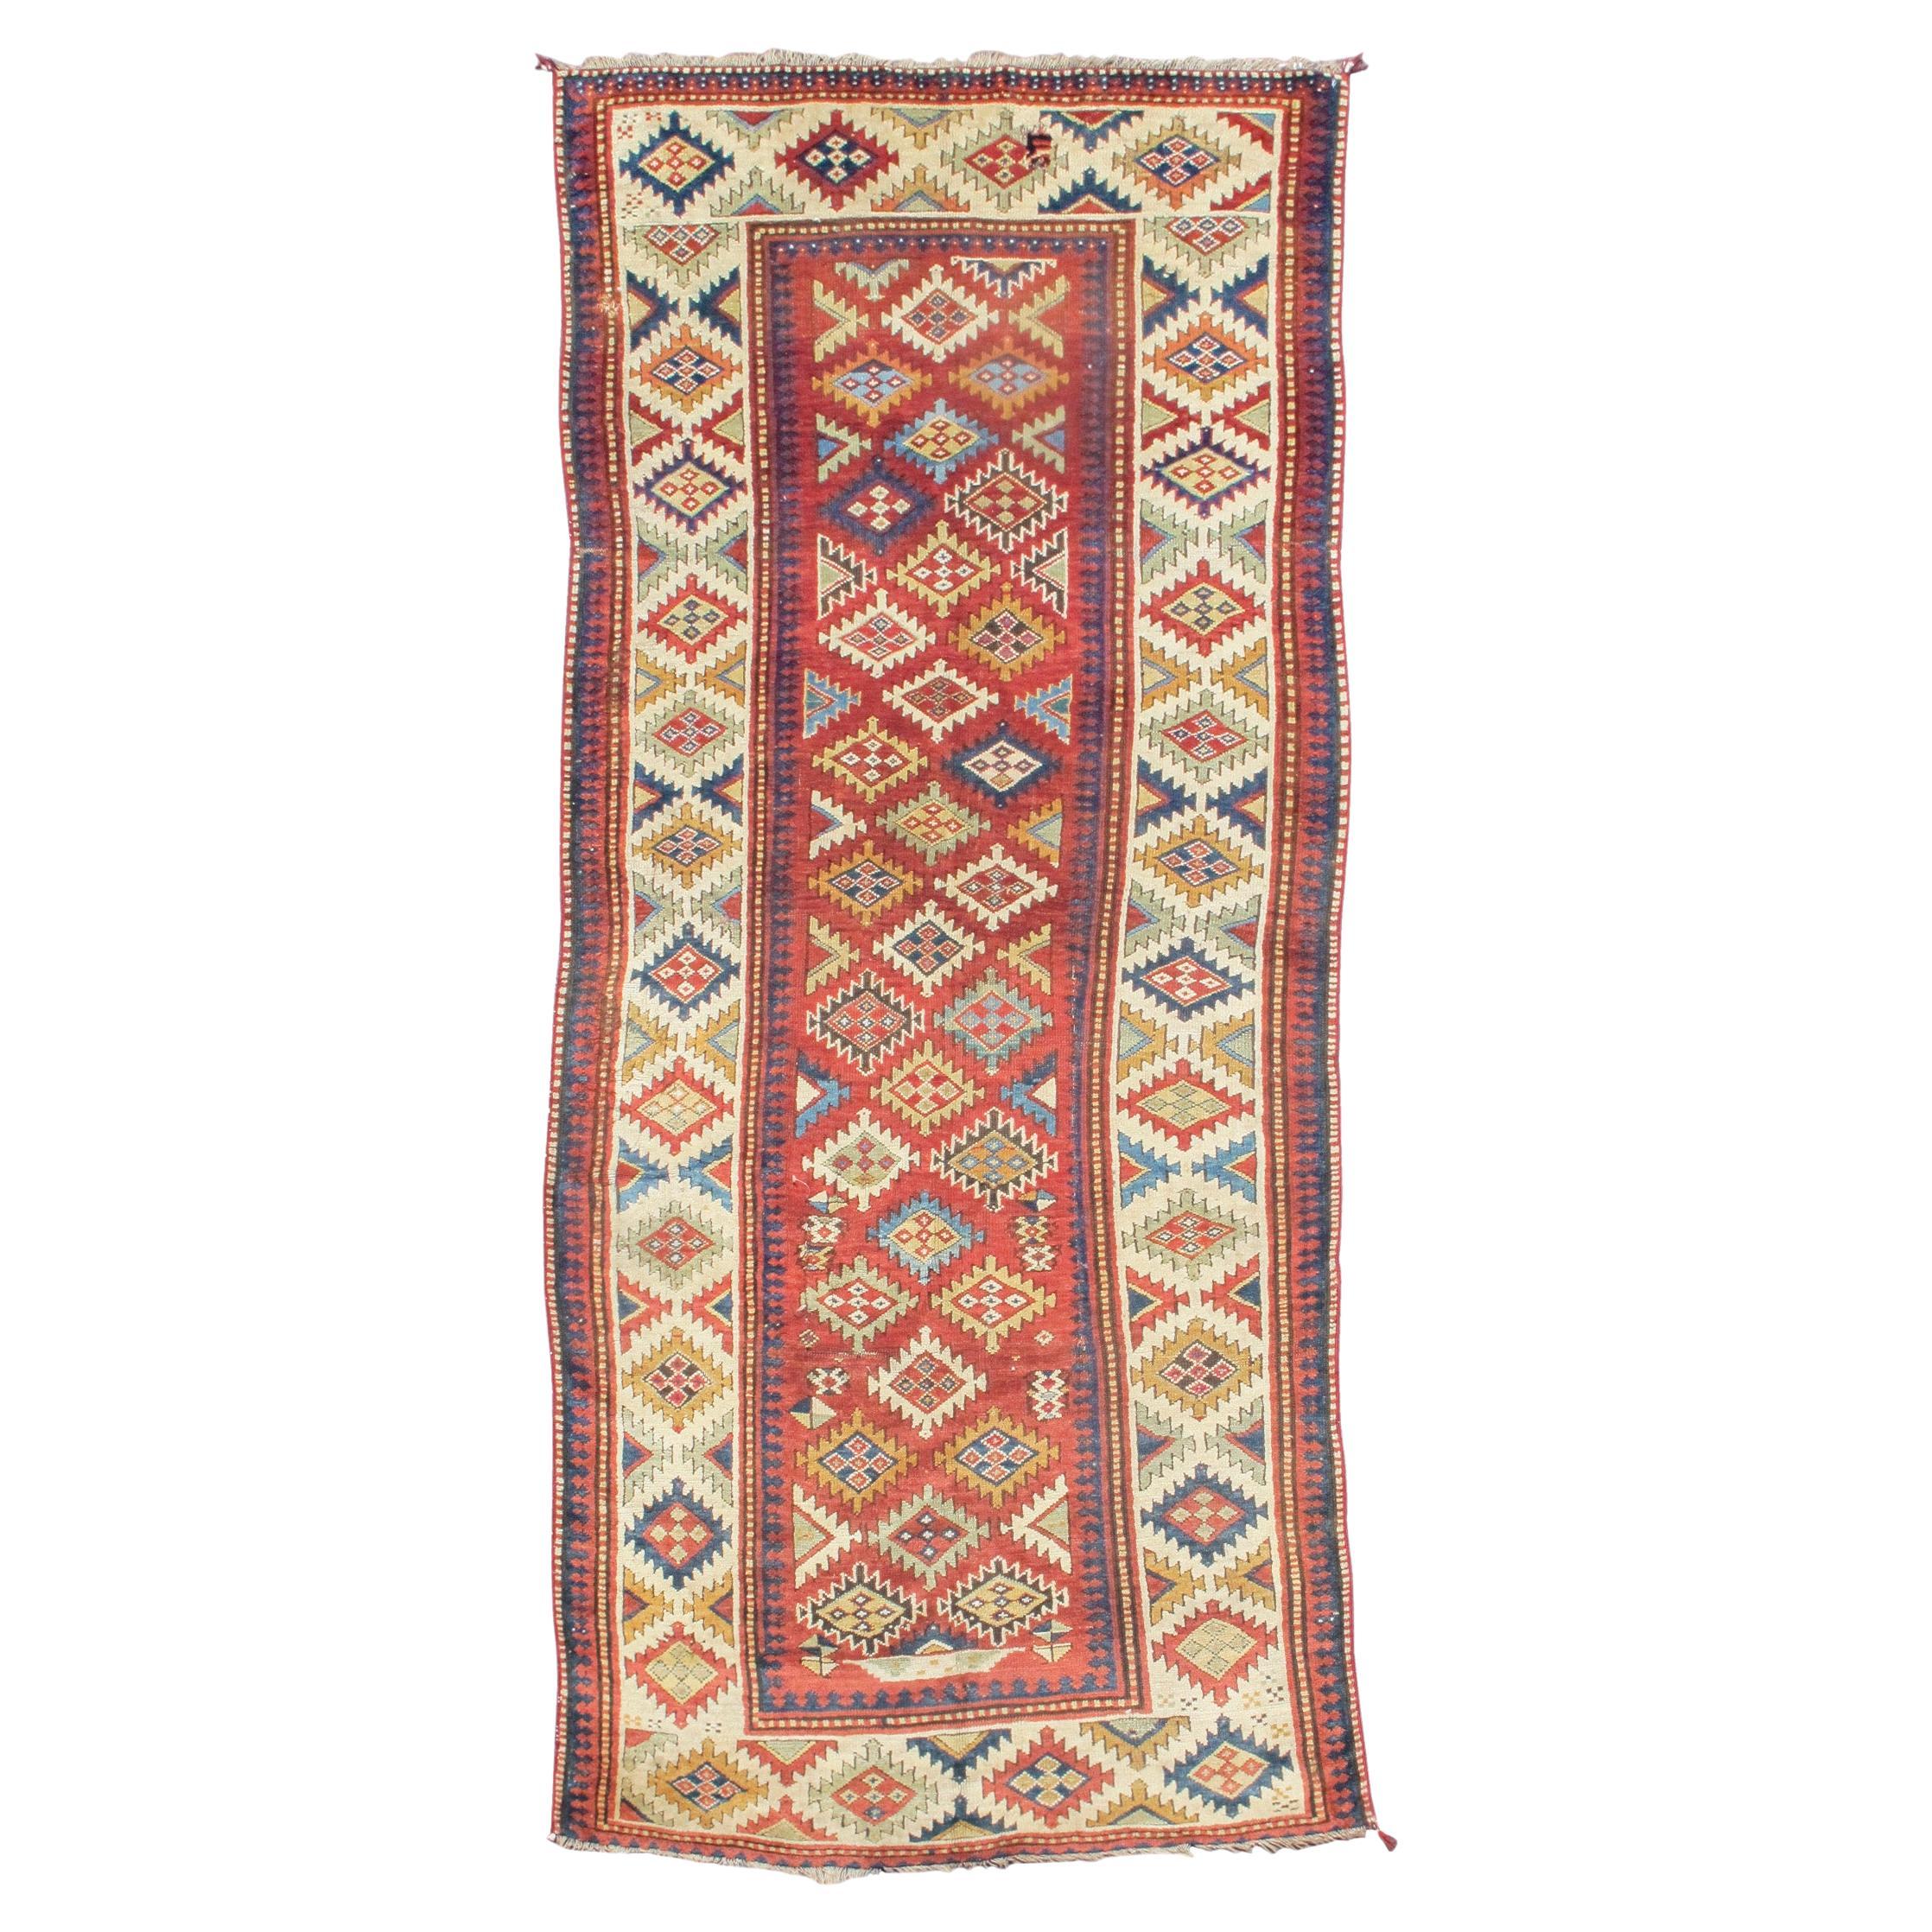 Antique South Caucasian Long Rug, Late 19th Century